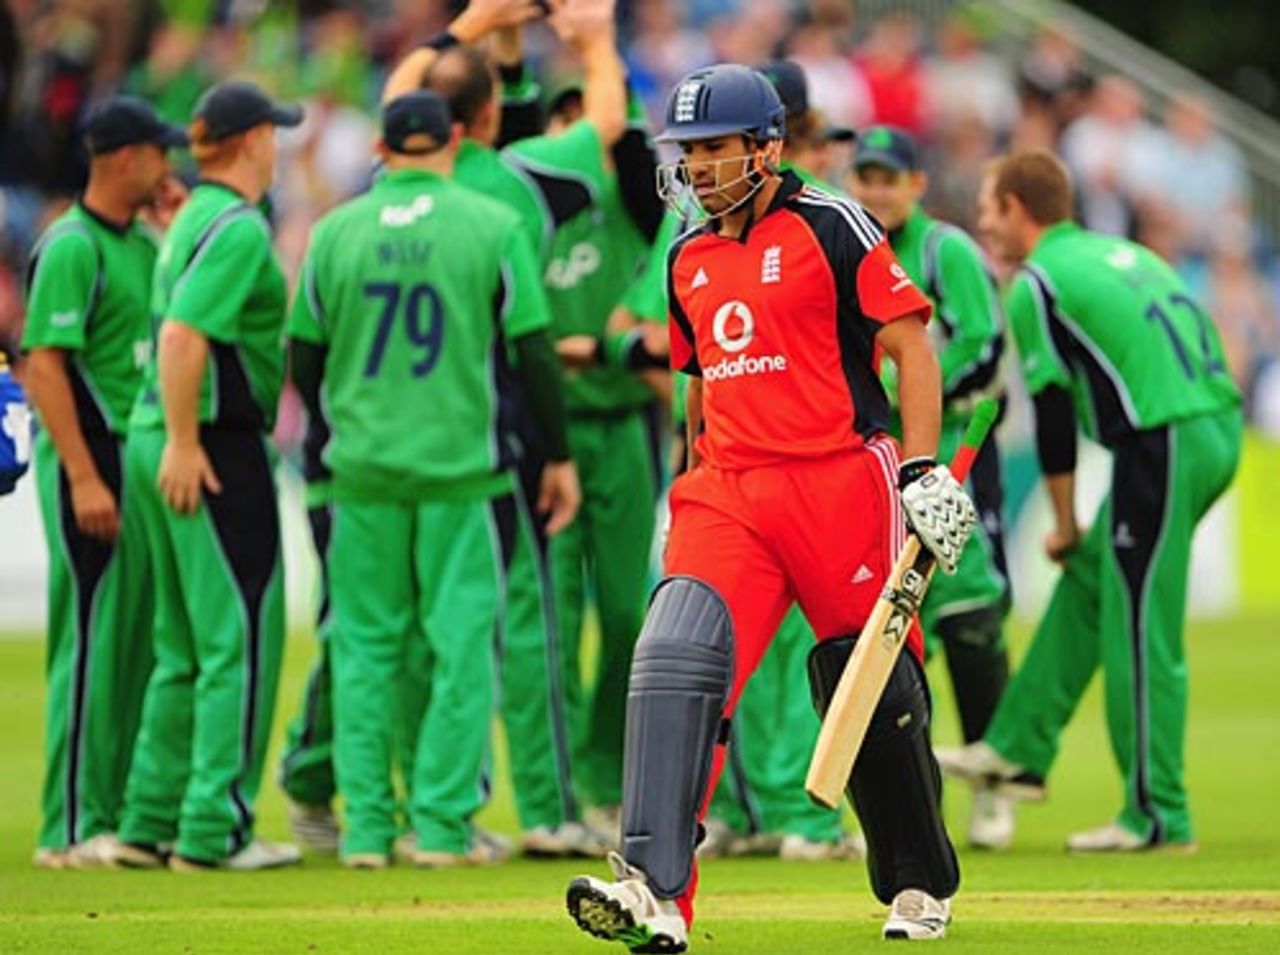 Ravi Bopara was out for a duck, Ireland v England, only ODI, Stormont, August 27, 2009